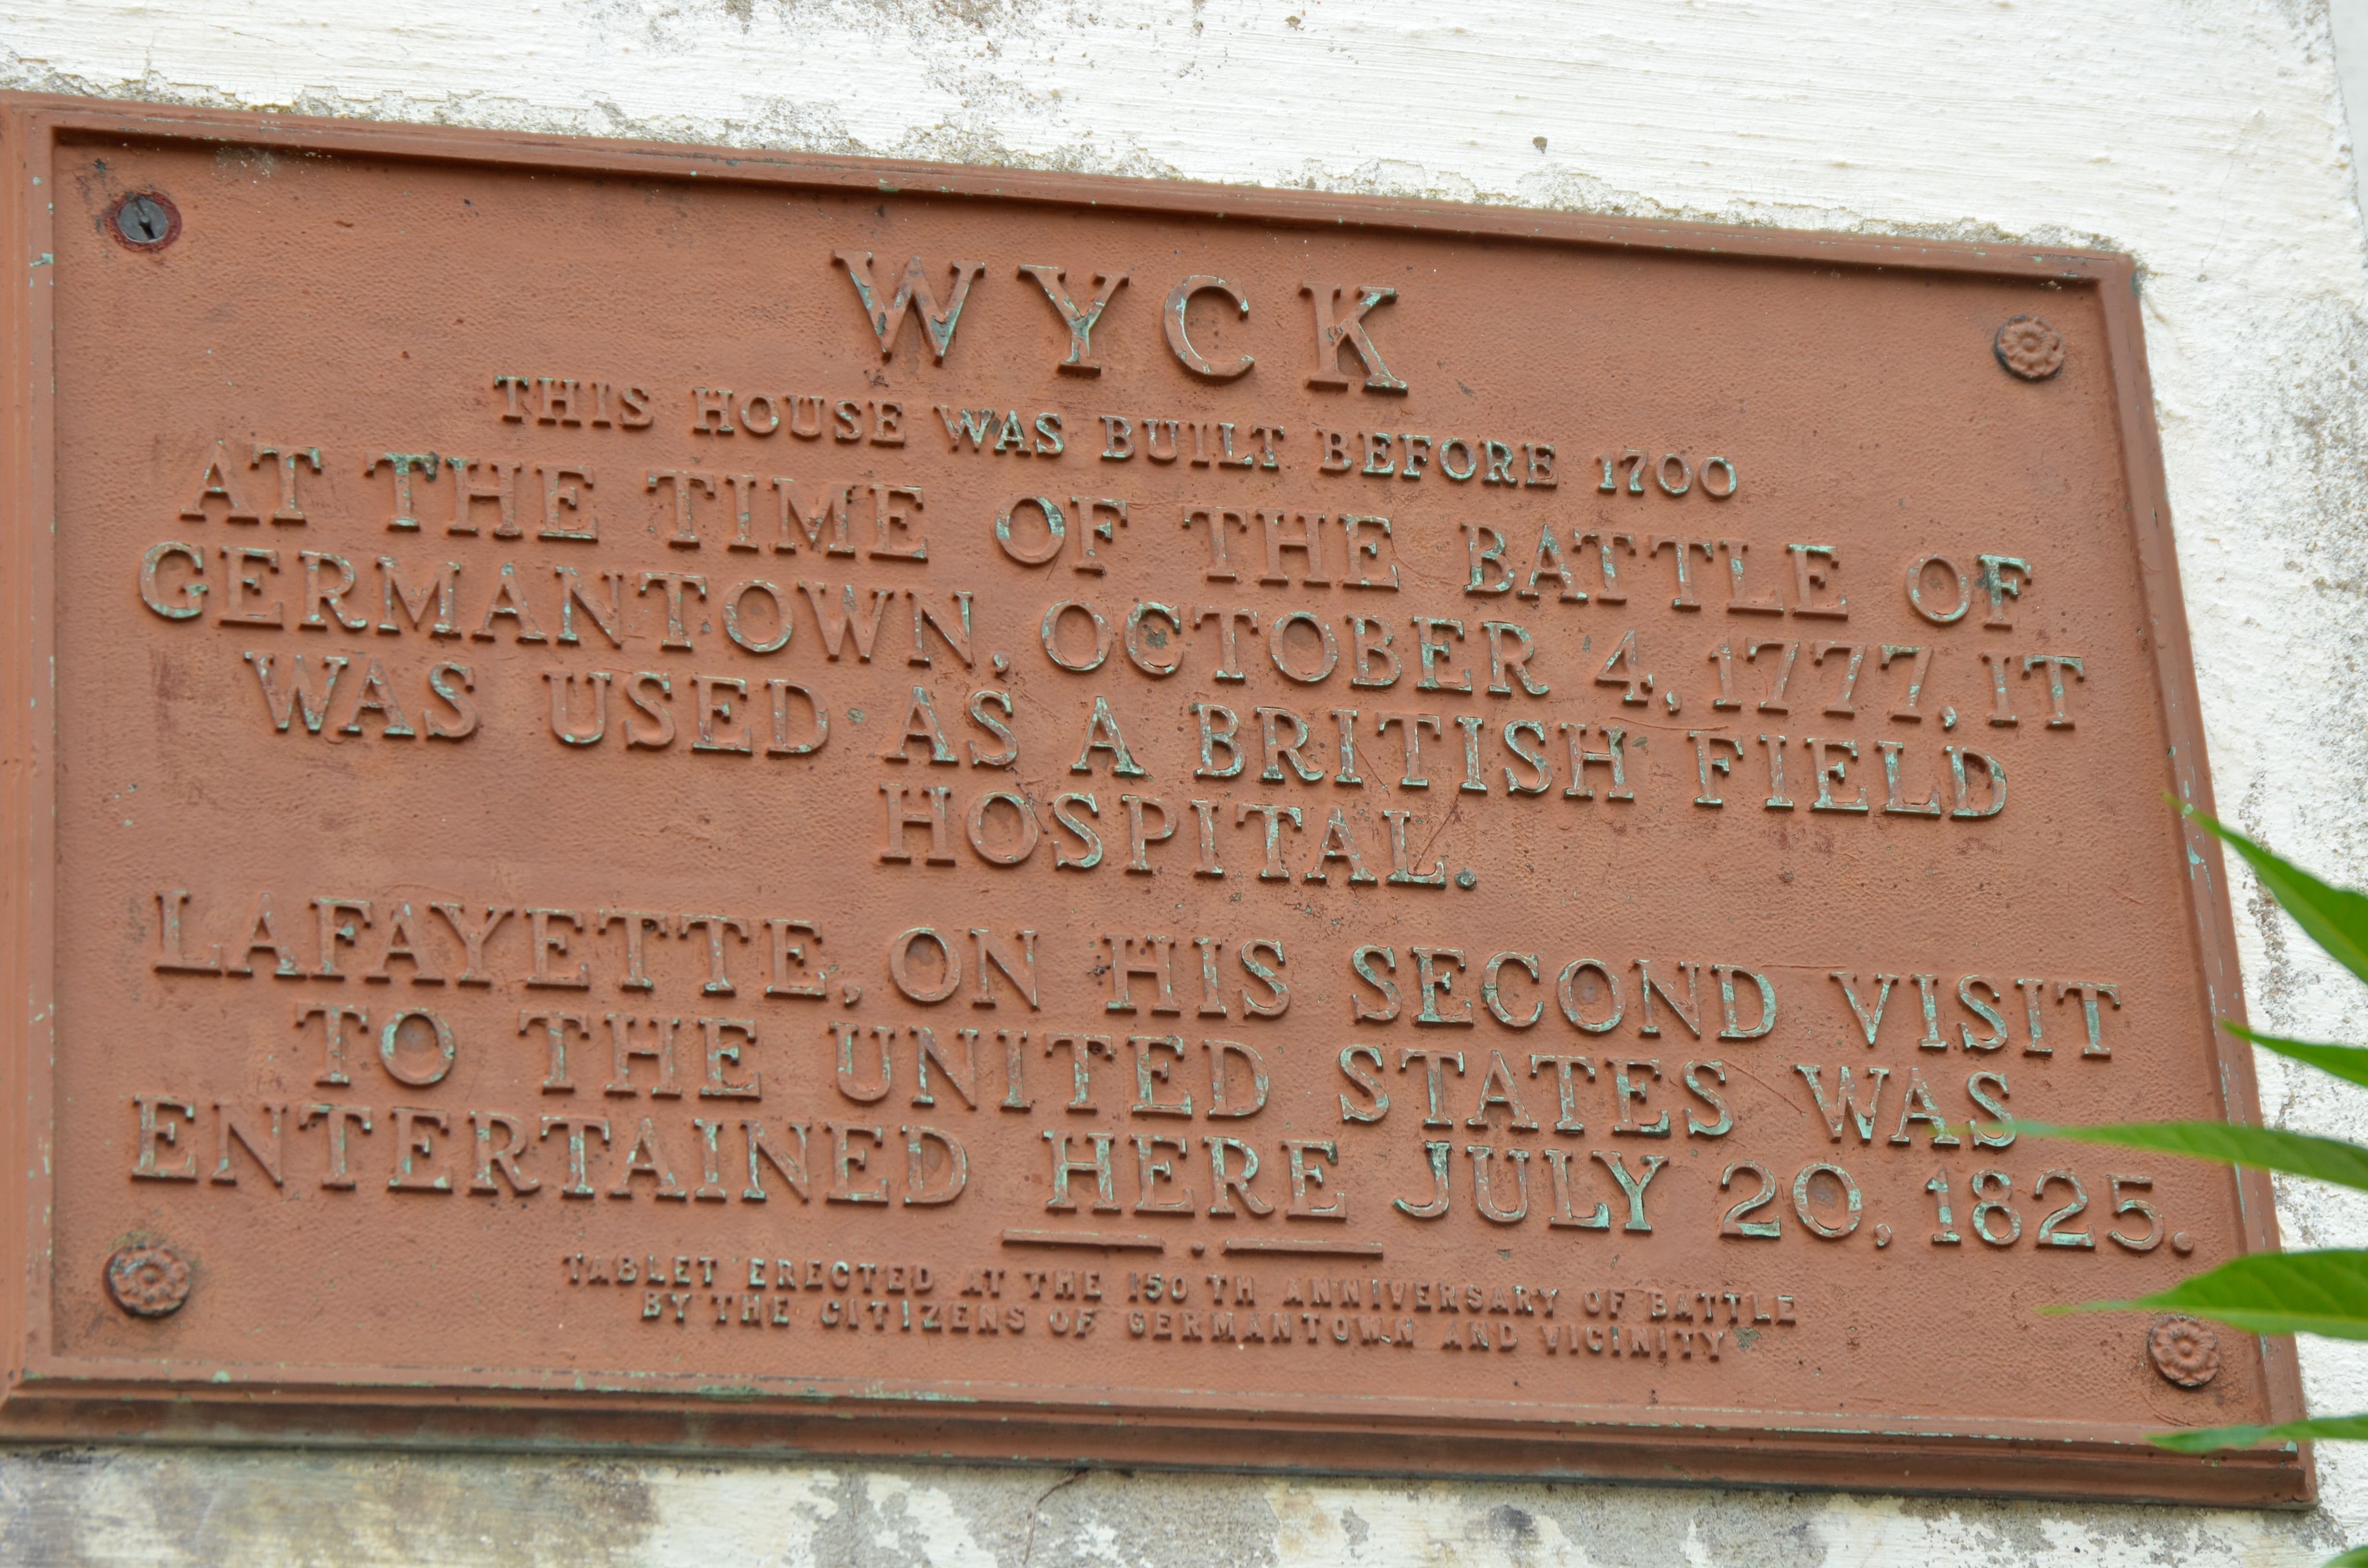 Wyck has a long and eventful history in Germantown, north of Philadelphia, PA